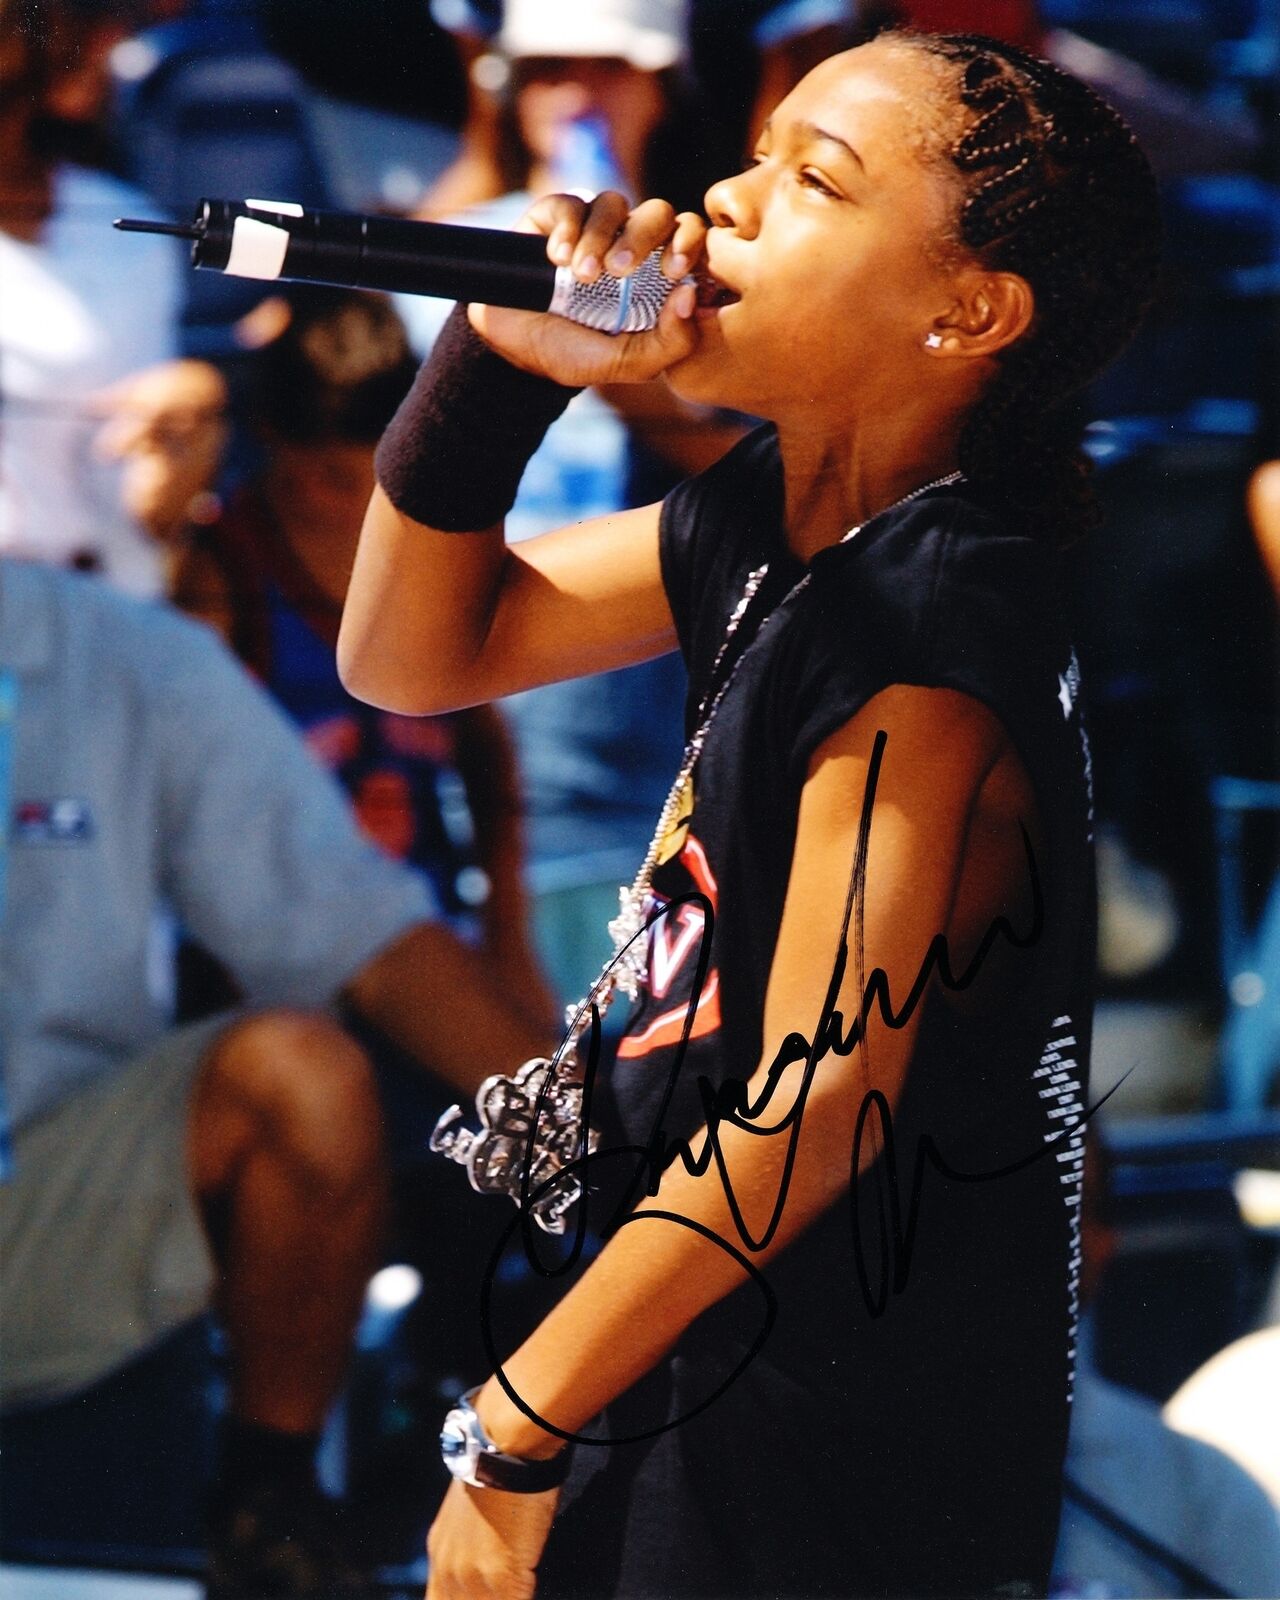 LIL BOW WOW SIGNED 8X10 PHOTO SHAD GREGORY MOSS